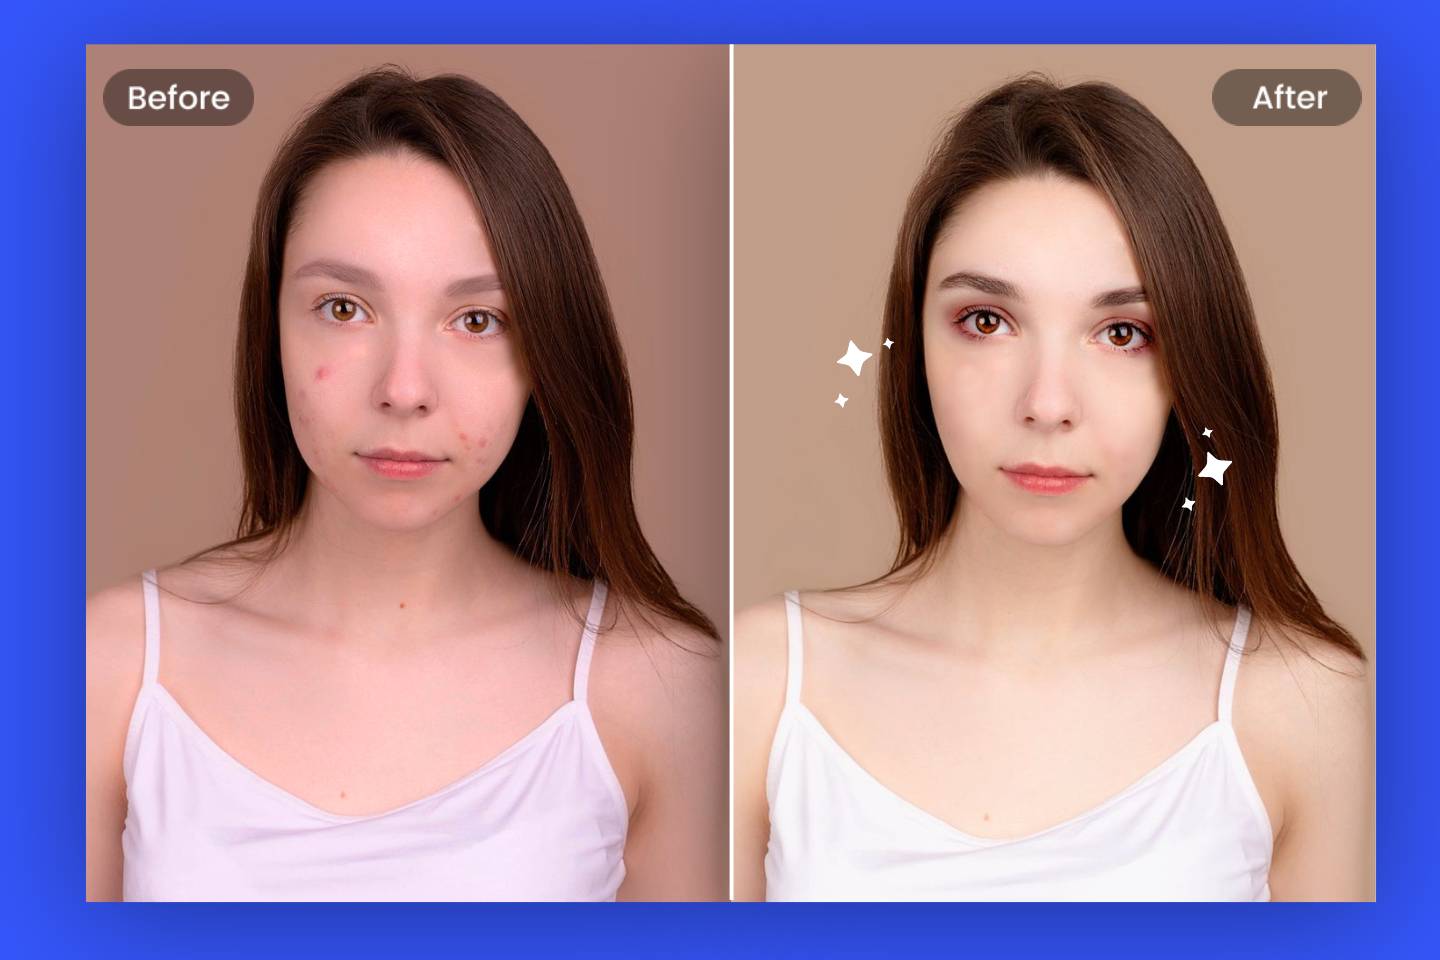 How to Easily Smooth Skin in a Picture, Free Photo Editor